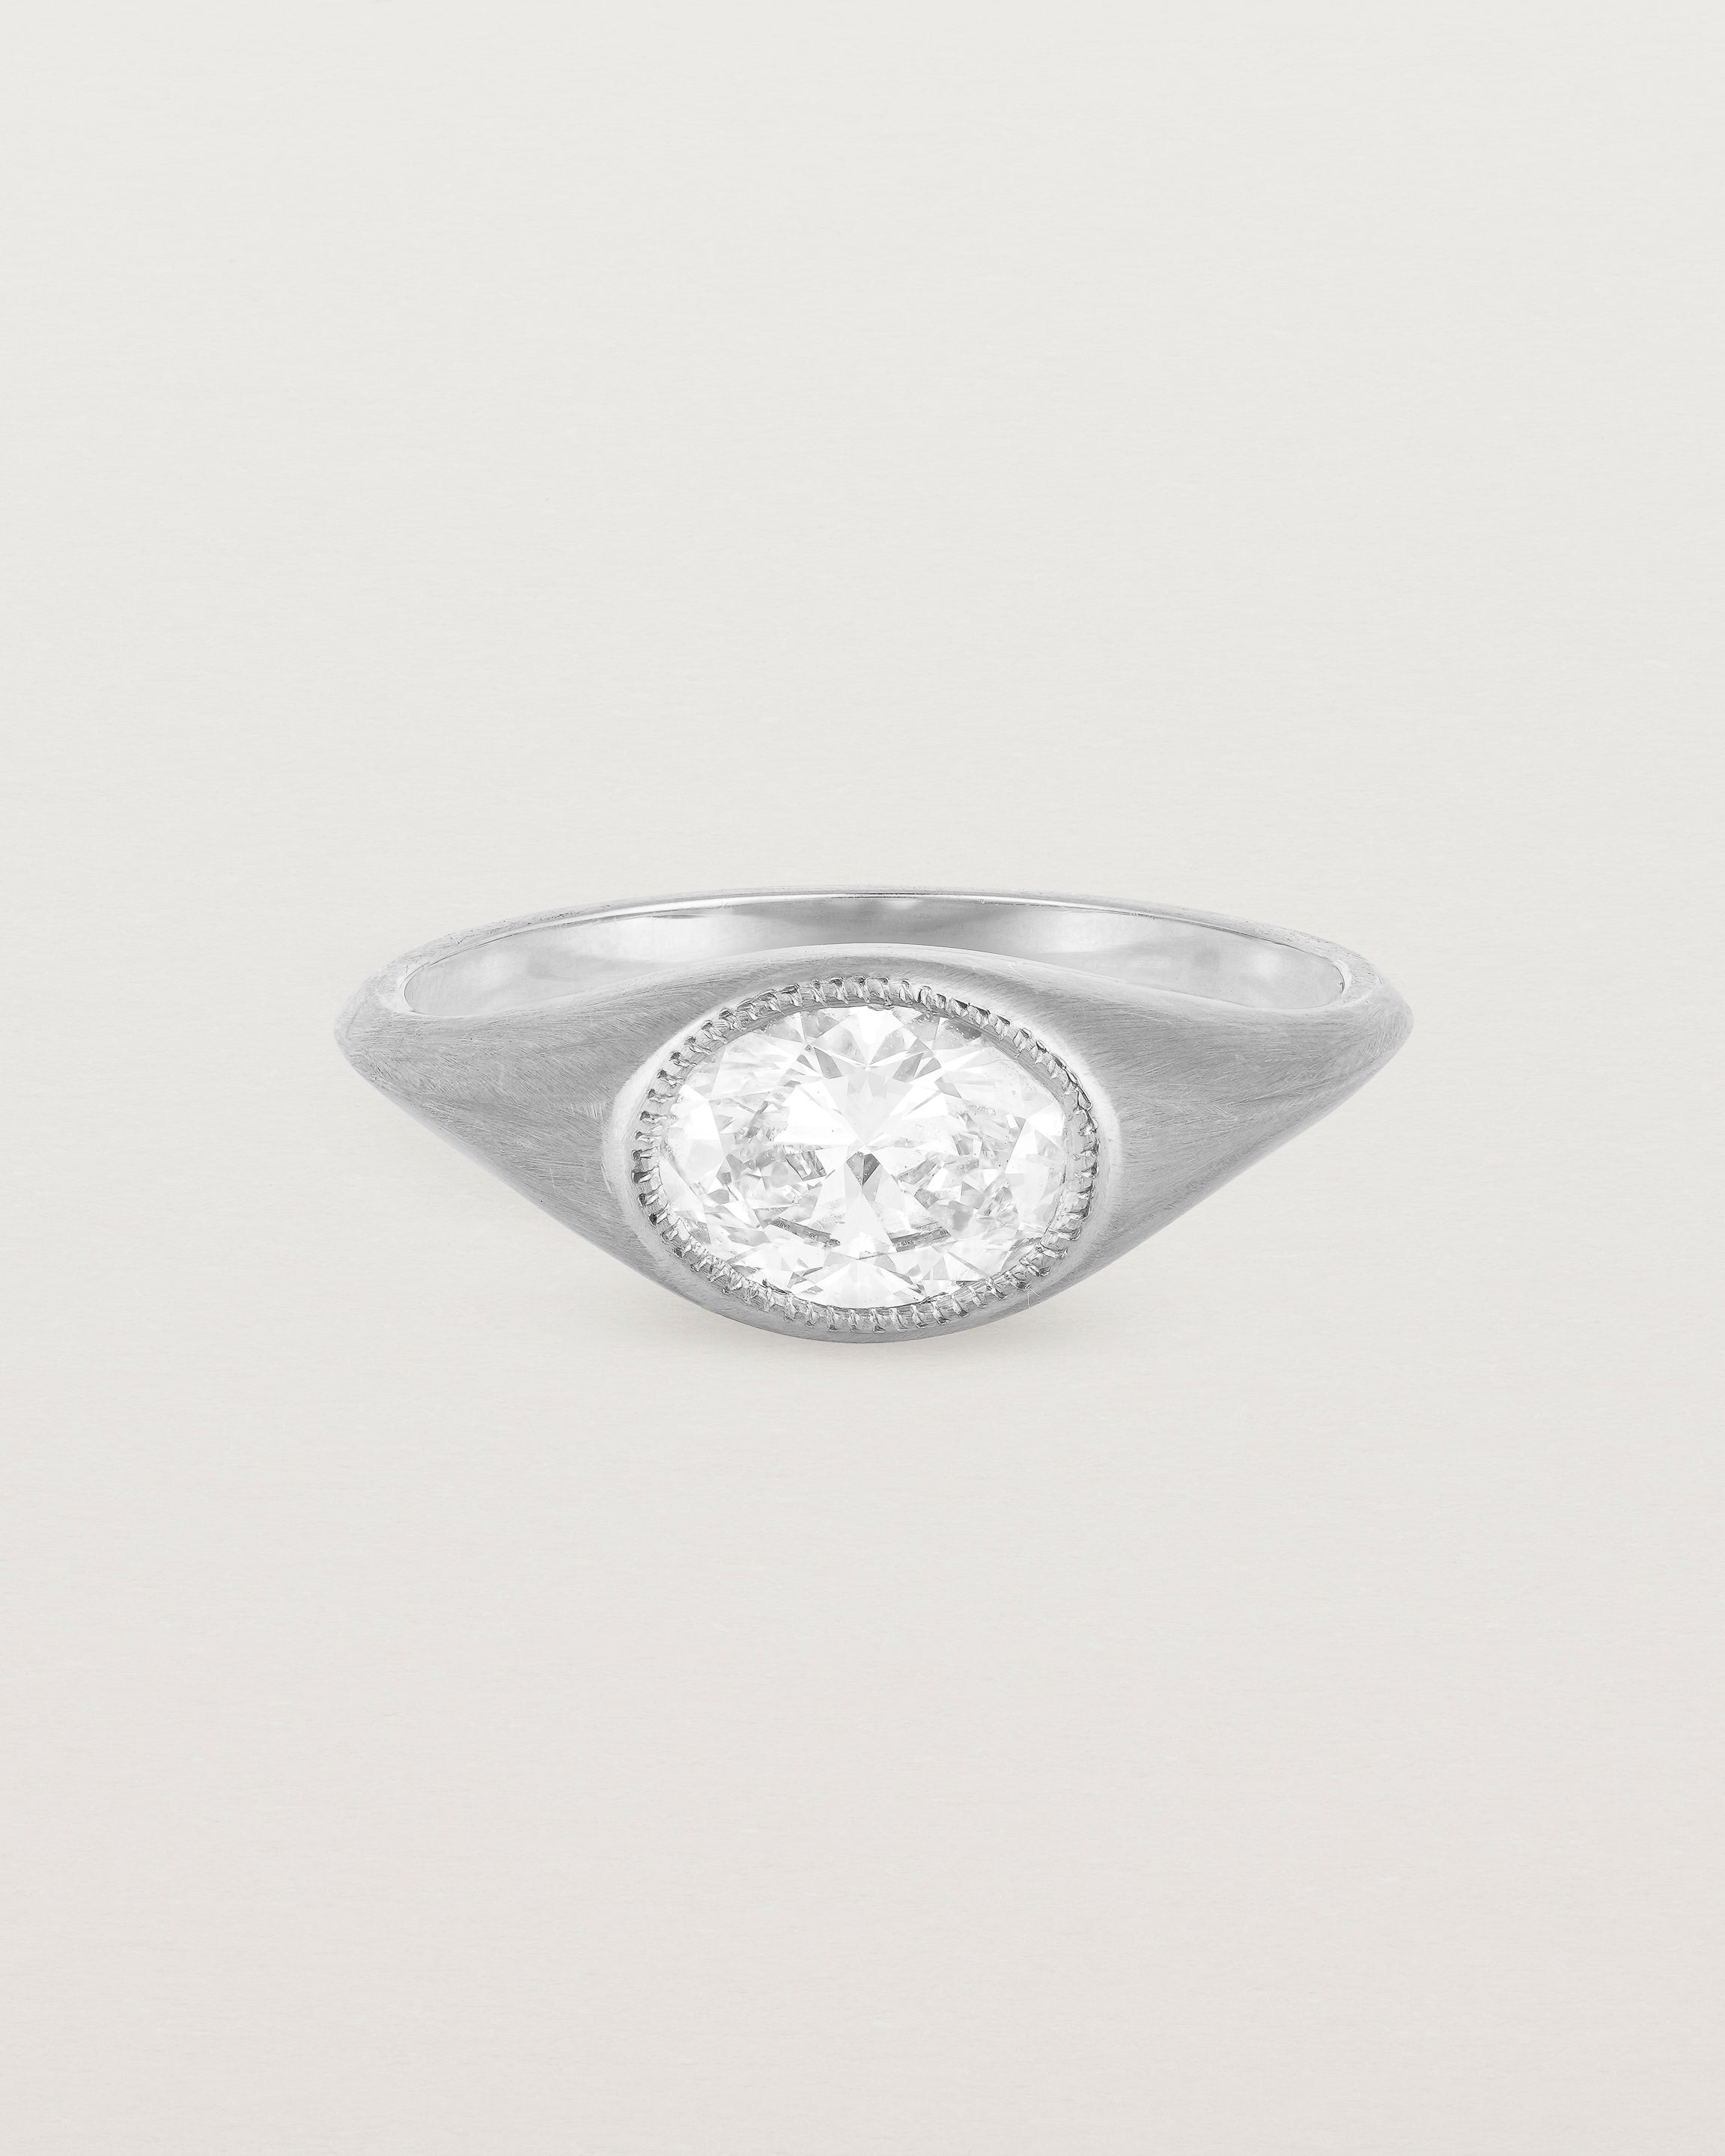 A white gold Signet Ring featuring a oval cut white diamond